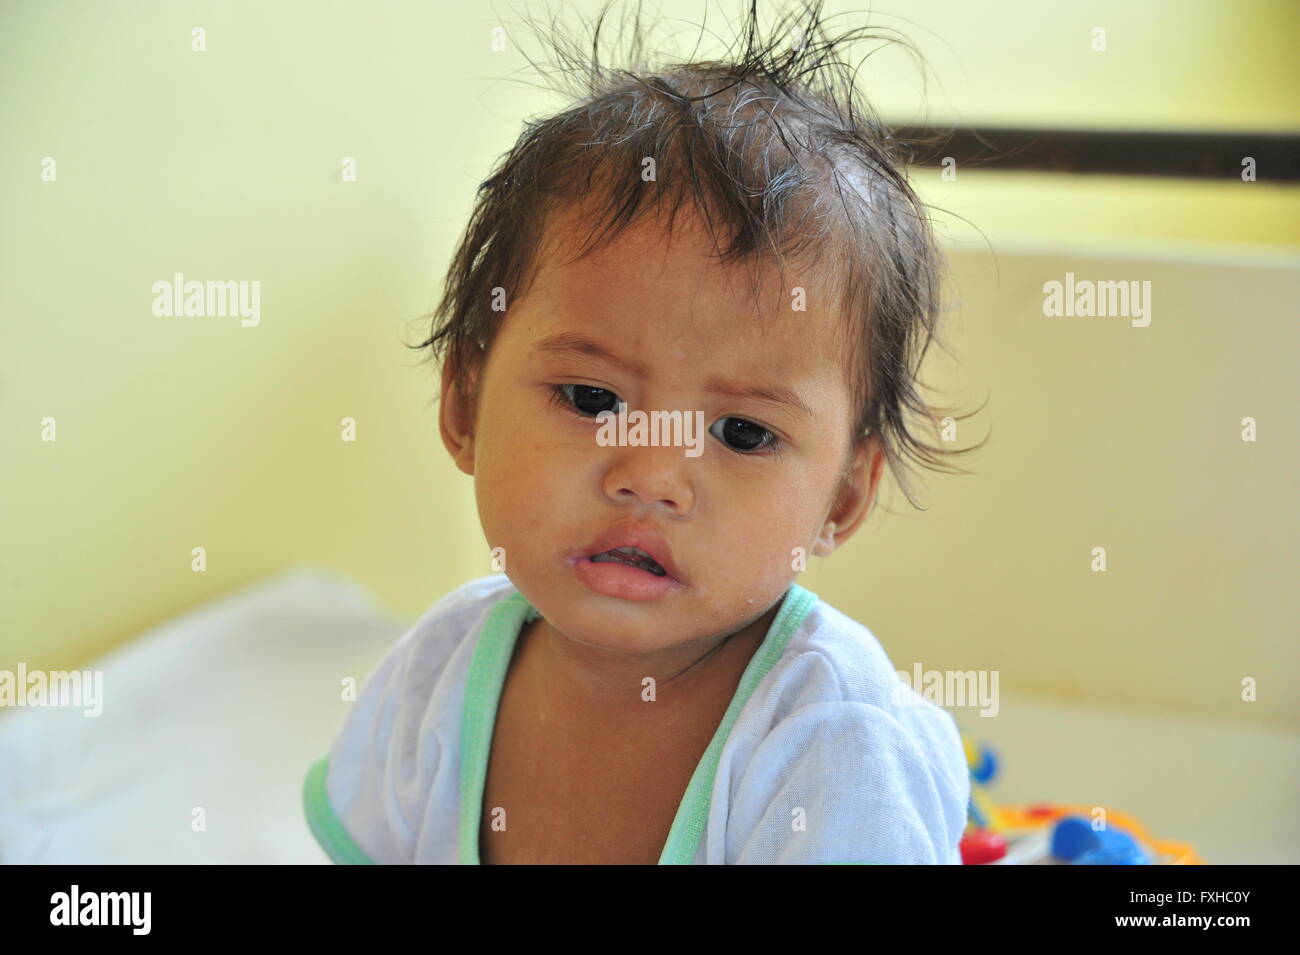 Baby in a German Doctors Hospital, Valencia, Mindanao, Philippines. Editorial use only. Stock Photo